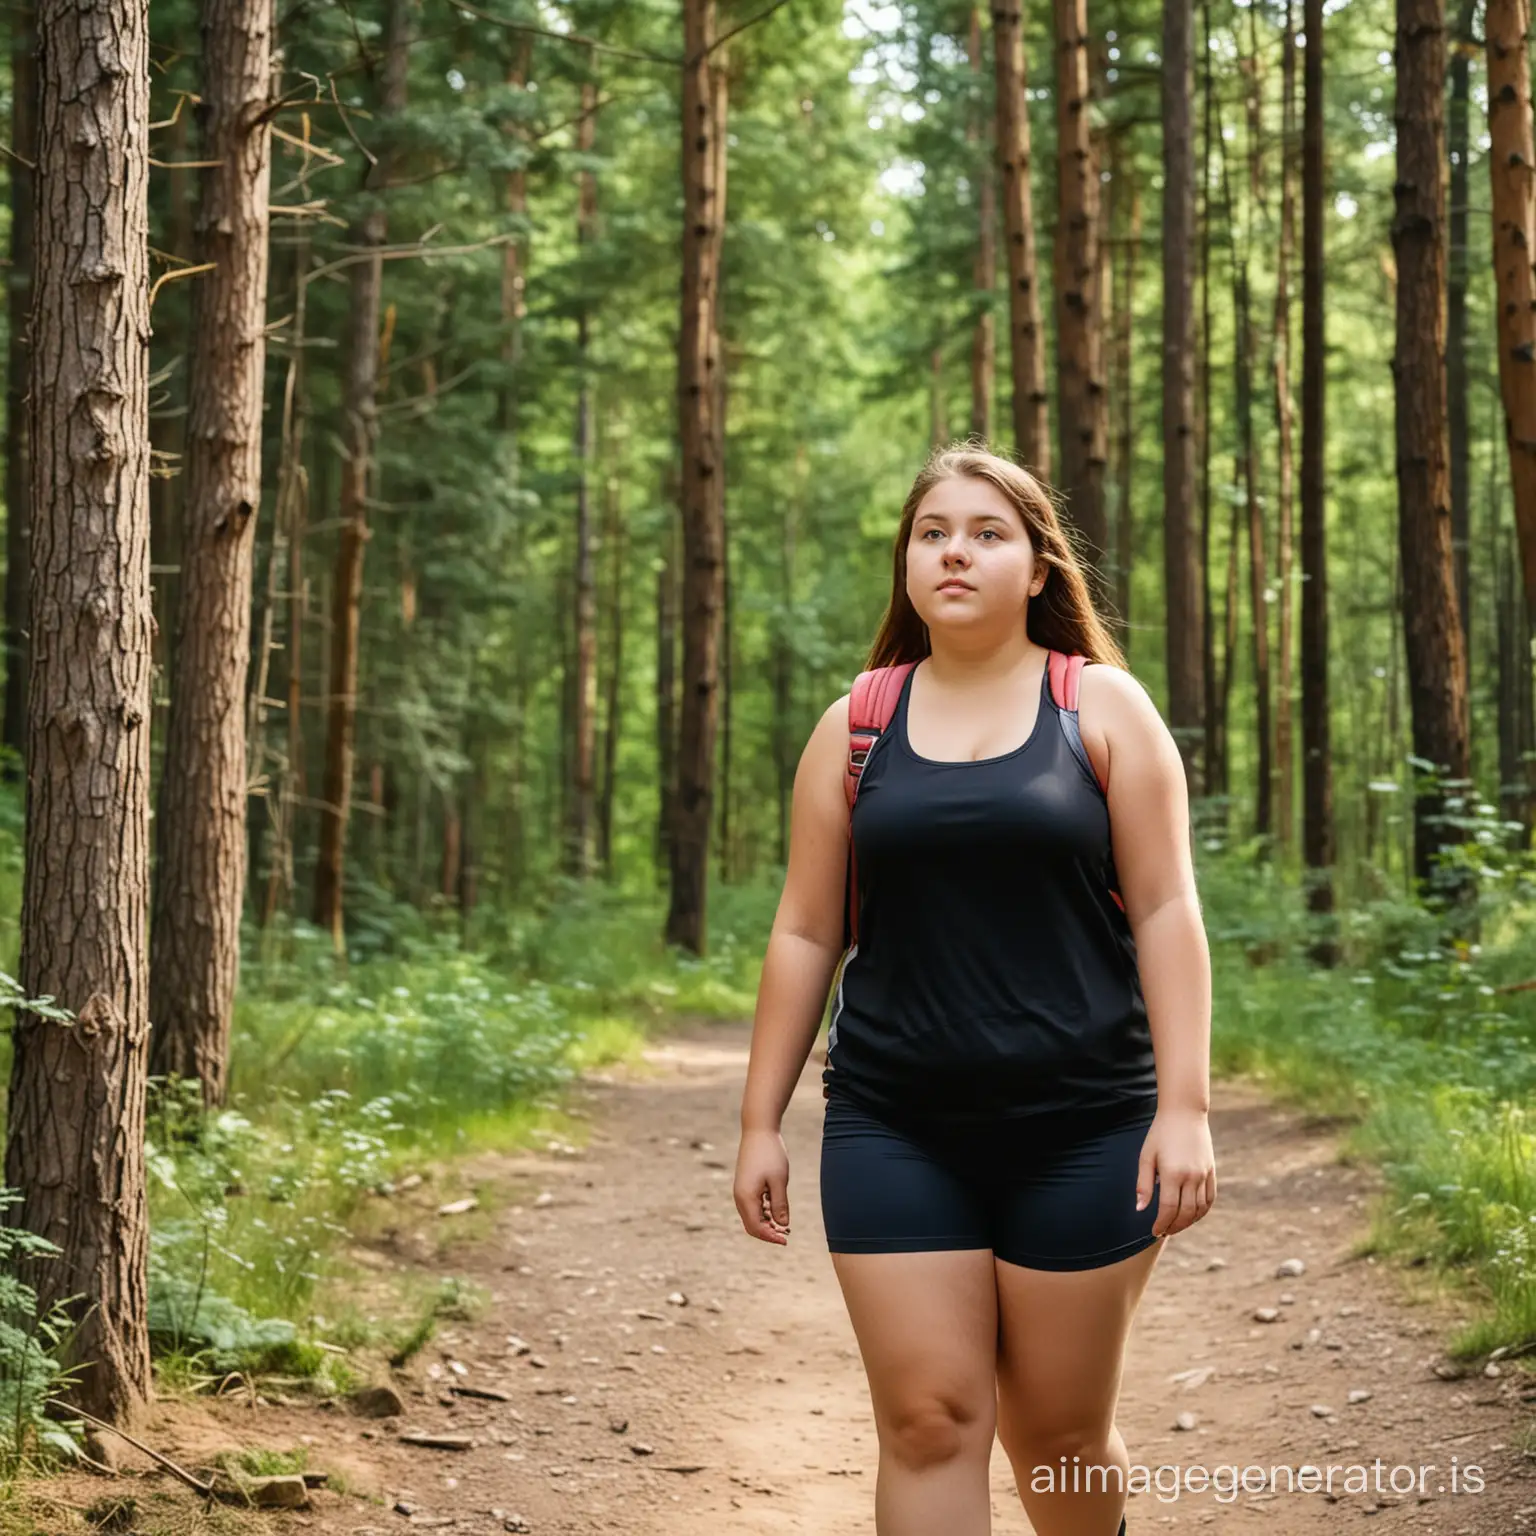 Fifteen years old chubby girl hiking in sportswear summer forest mountain